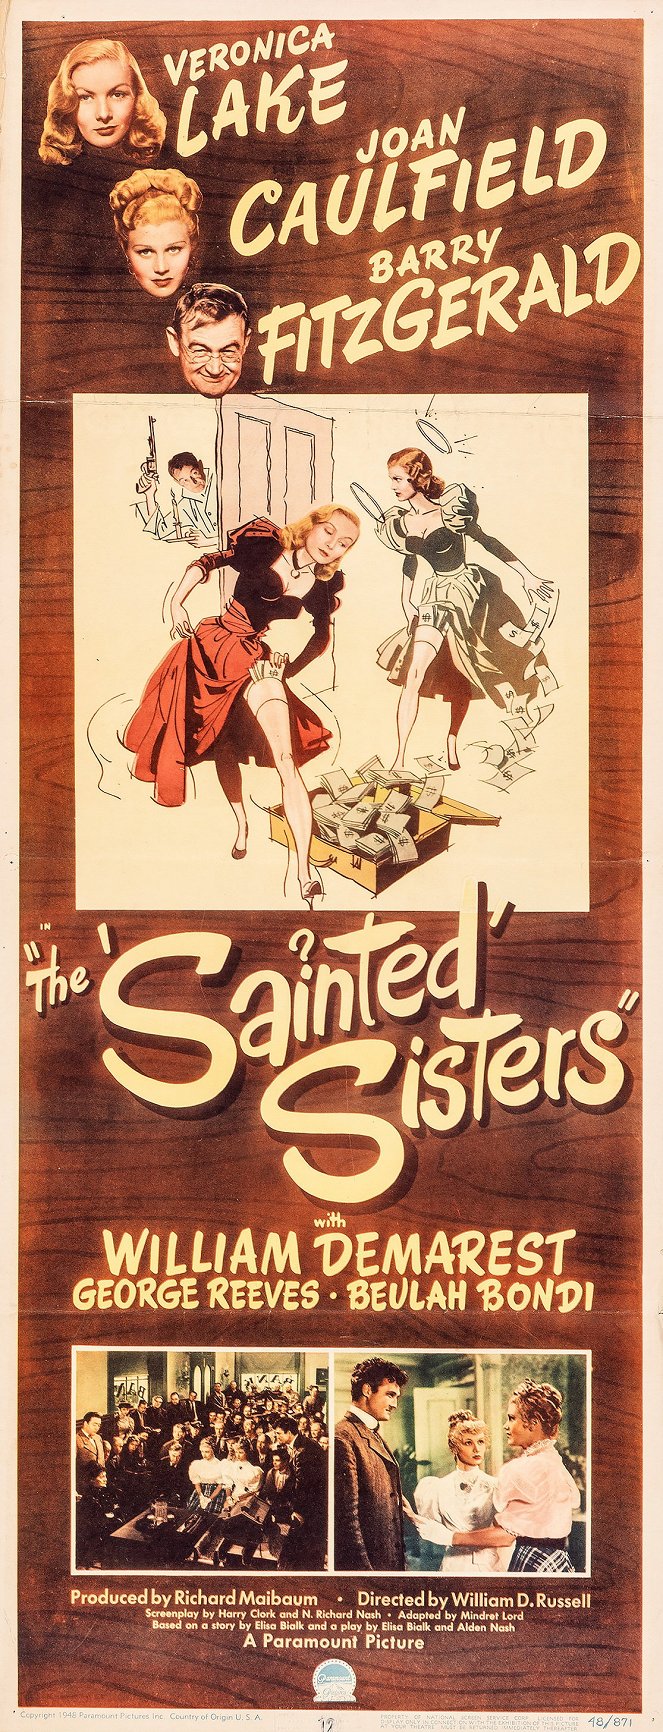 The Sainted Sisters - Posters